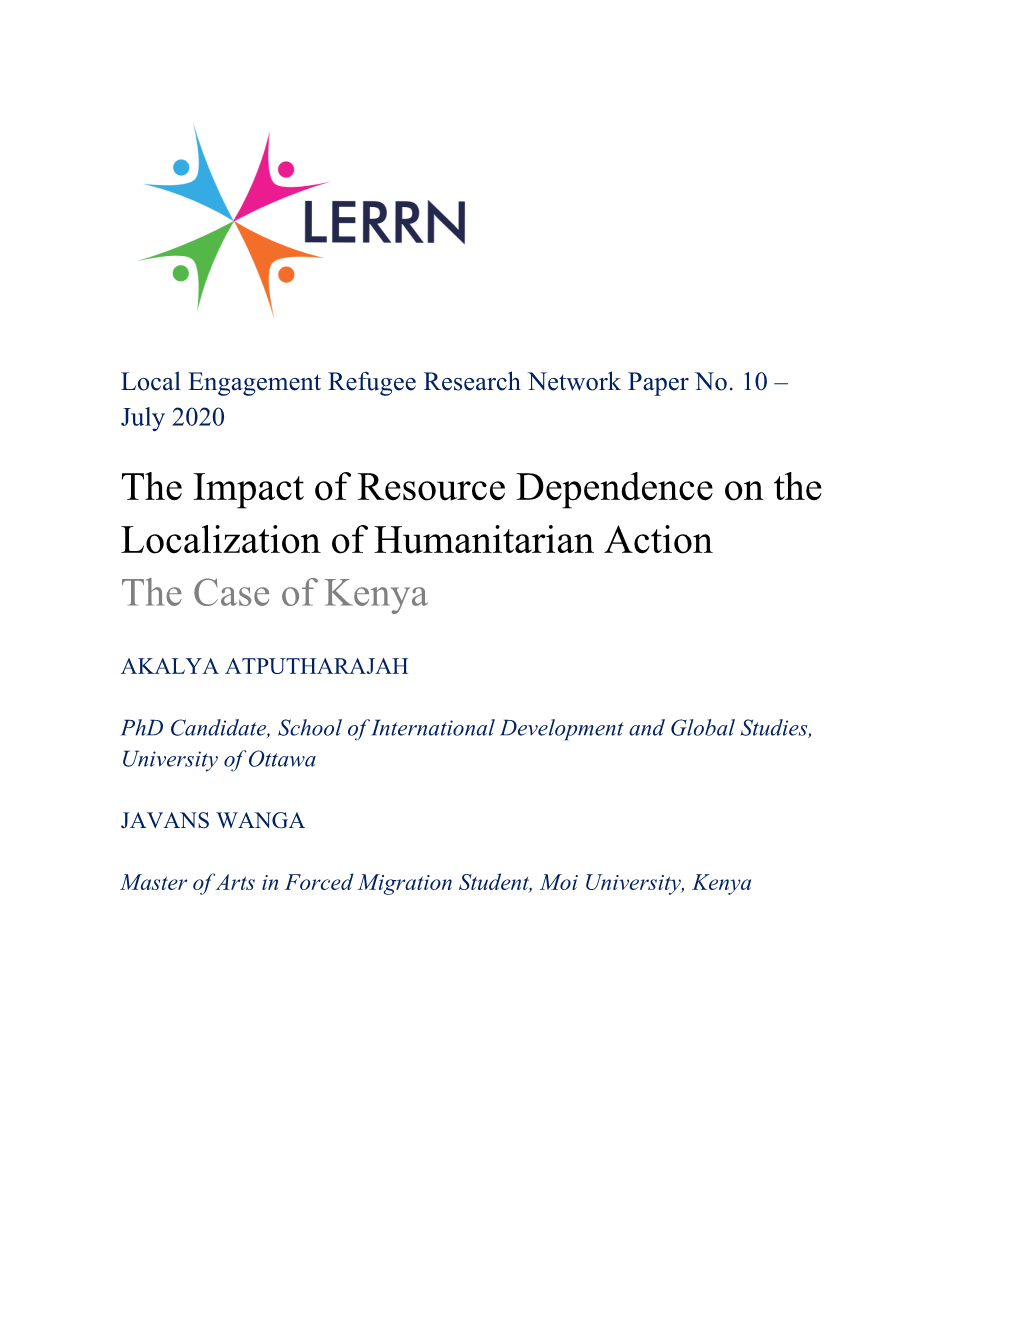 The Impact of Resource Dependence on the Localization of Humanitarian Action the Case of Kenya